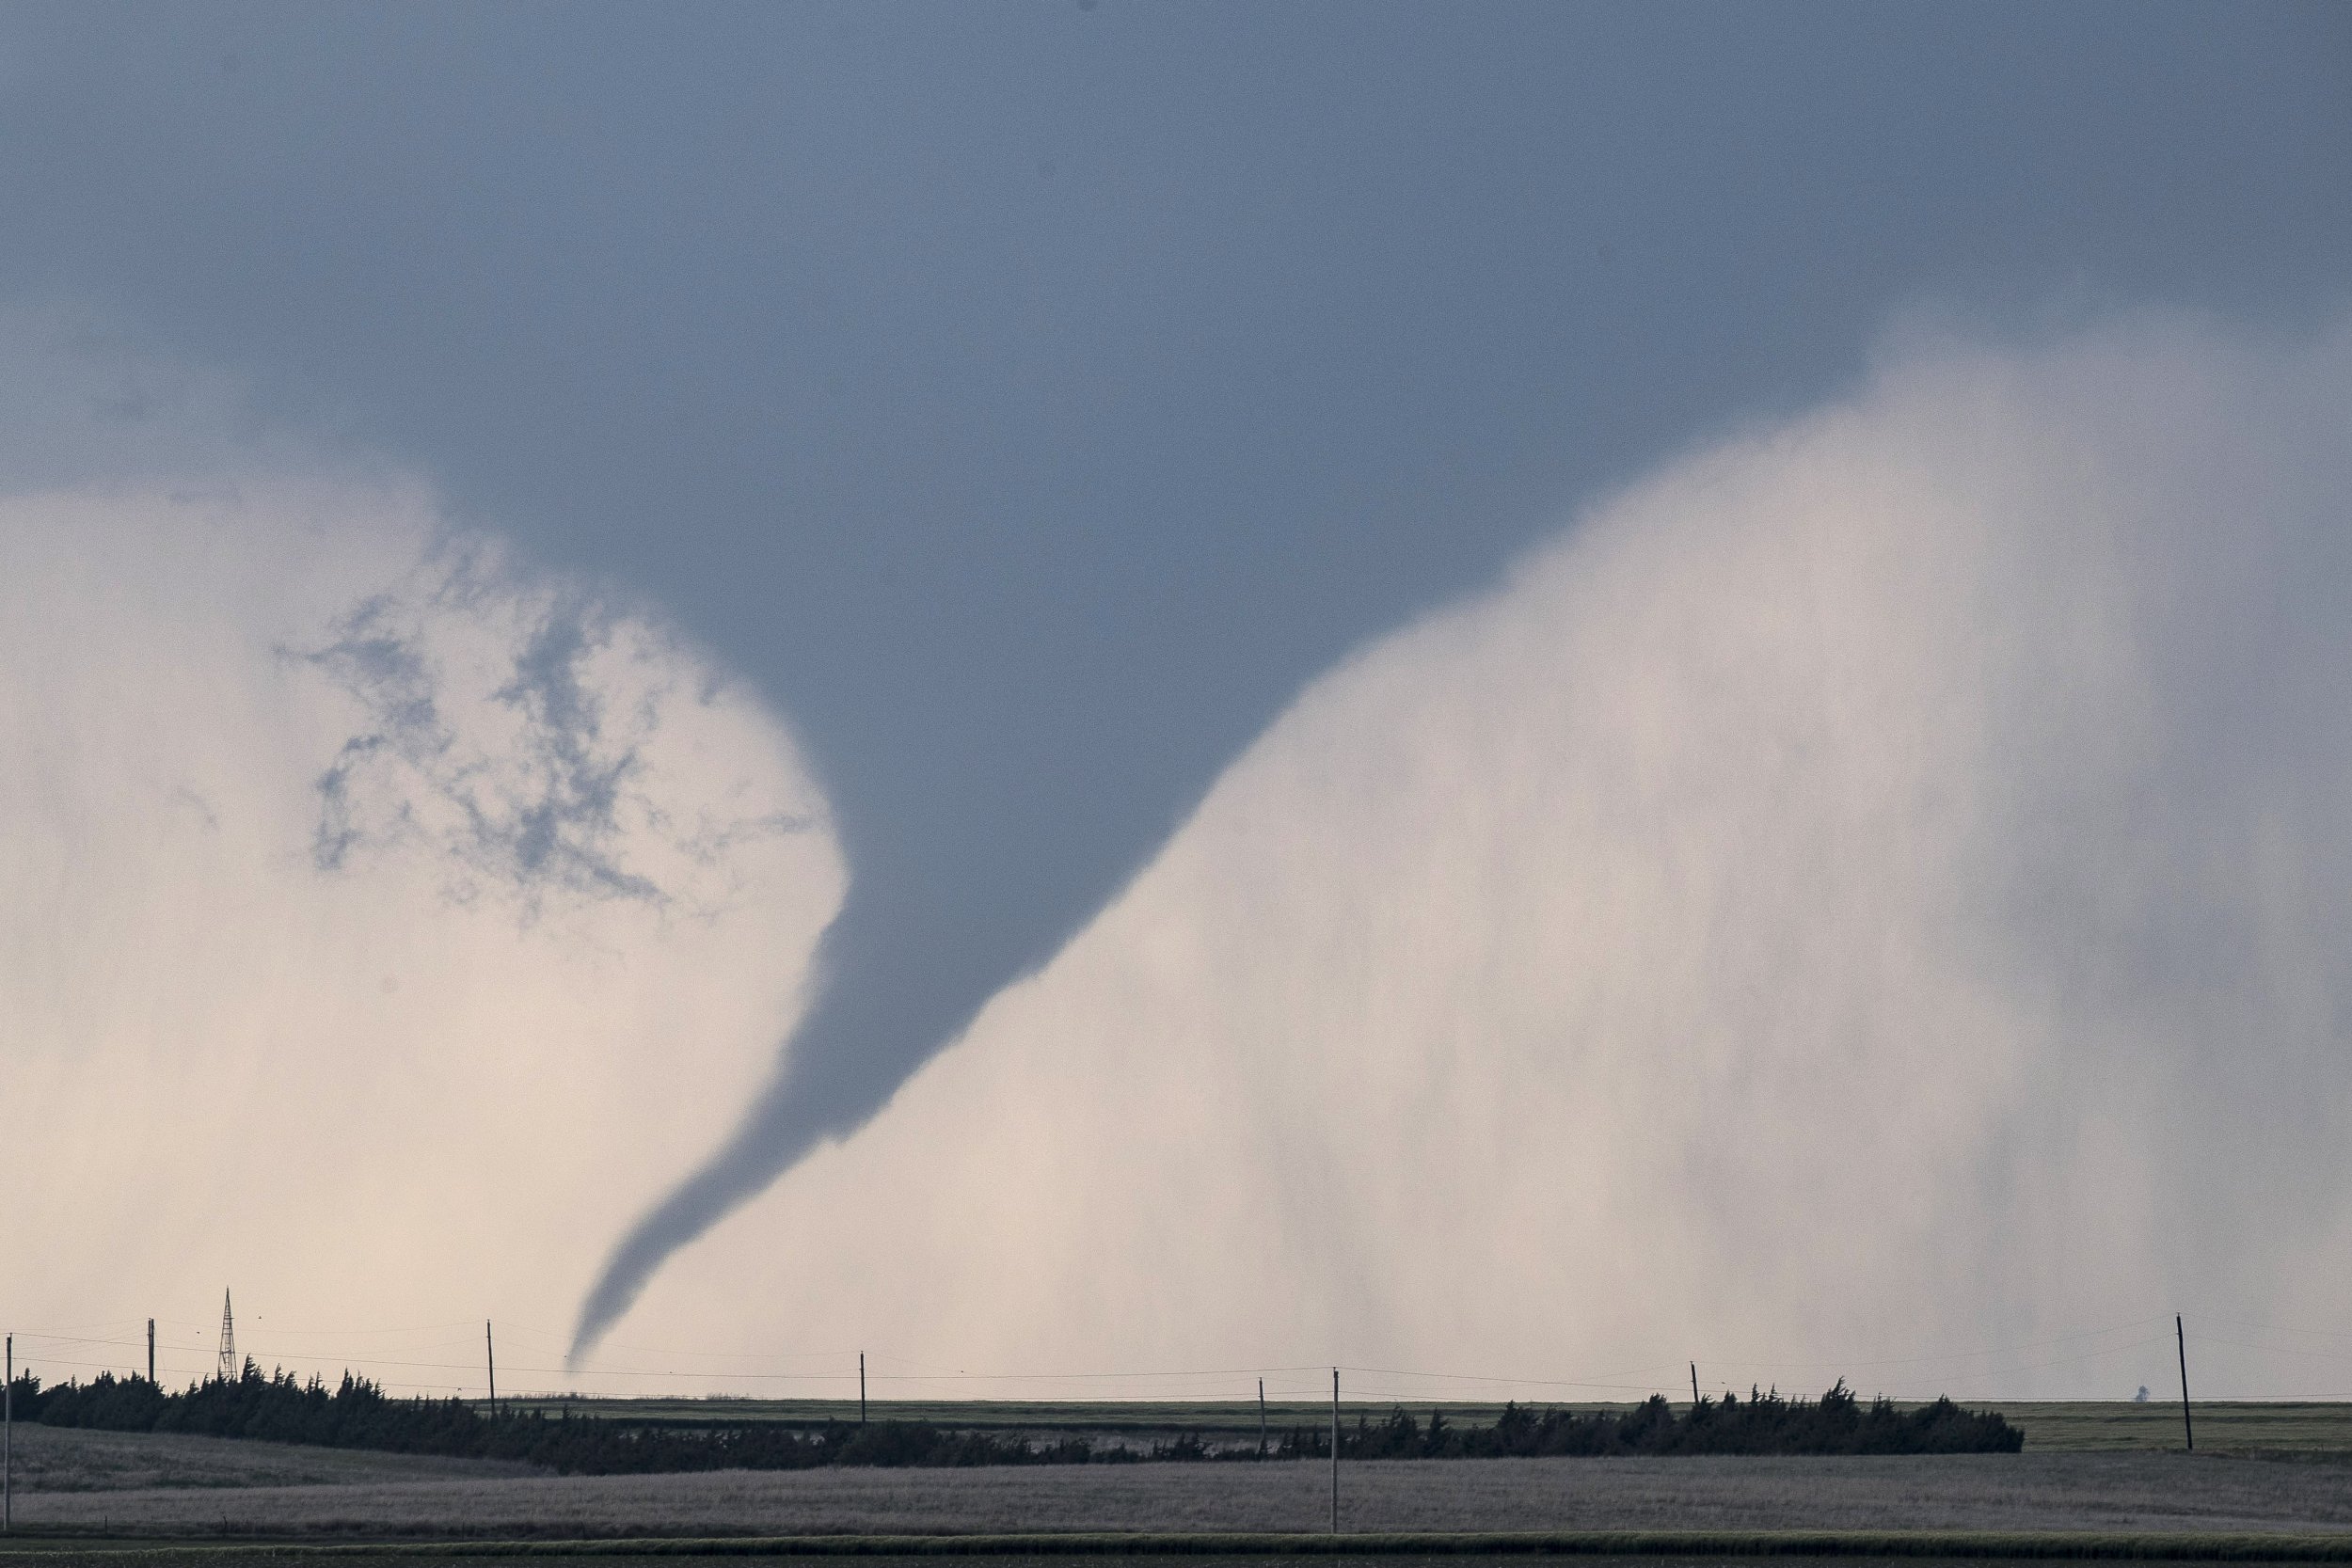 Tornadoes Make Inaudible Sounds Before They Form, Detection Could Help